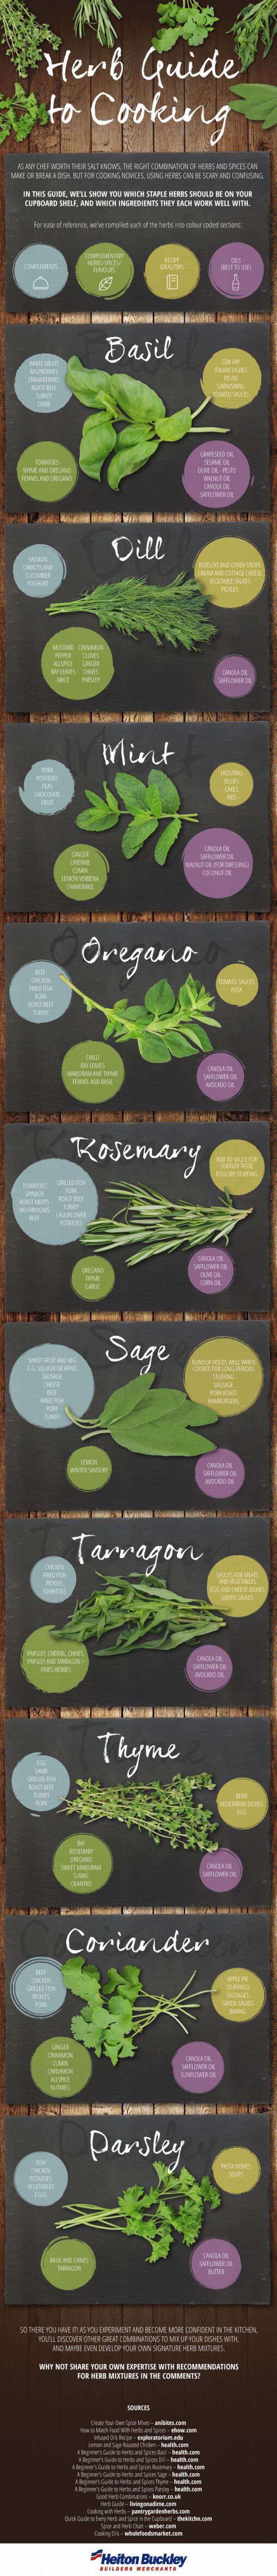 How to Pair Herbs with Foods